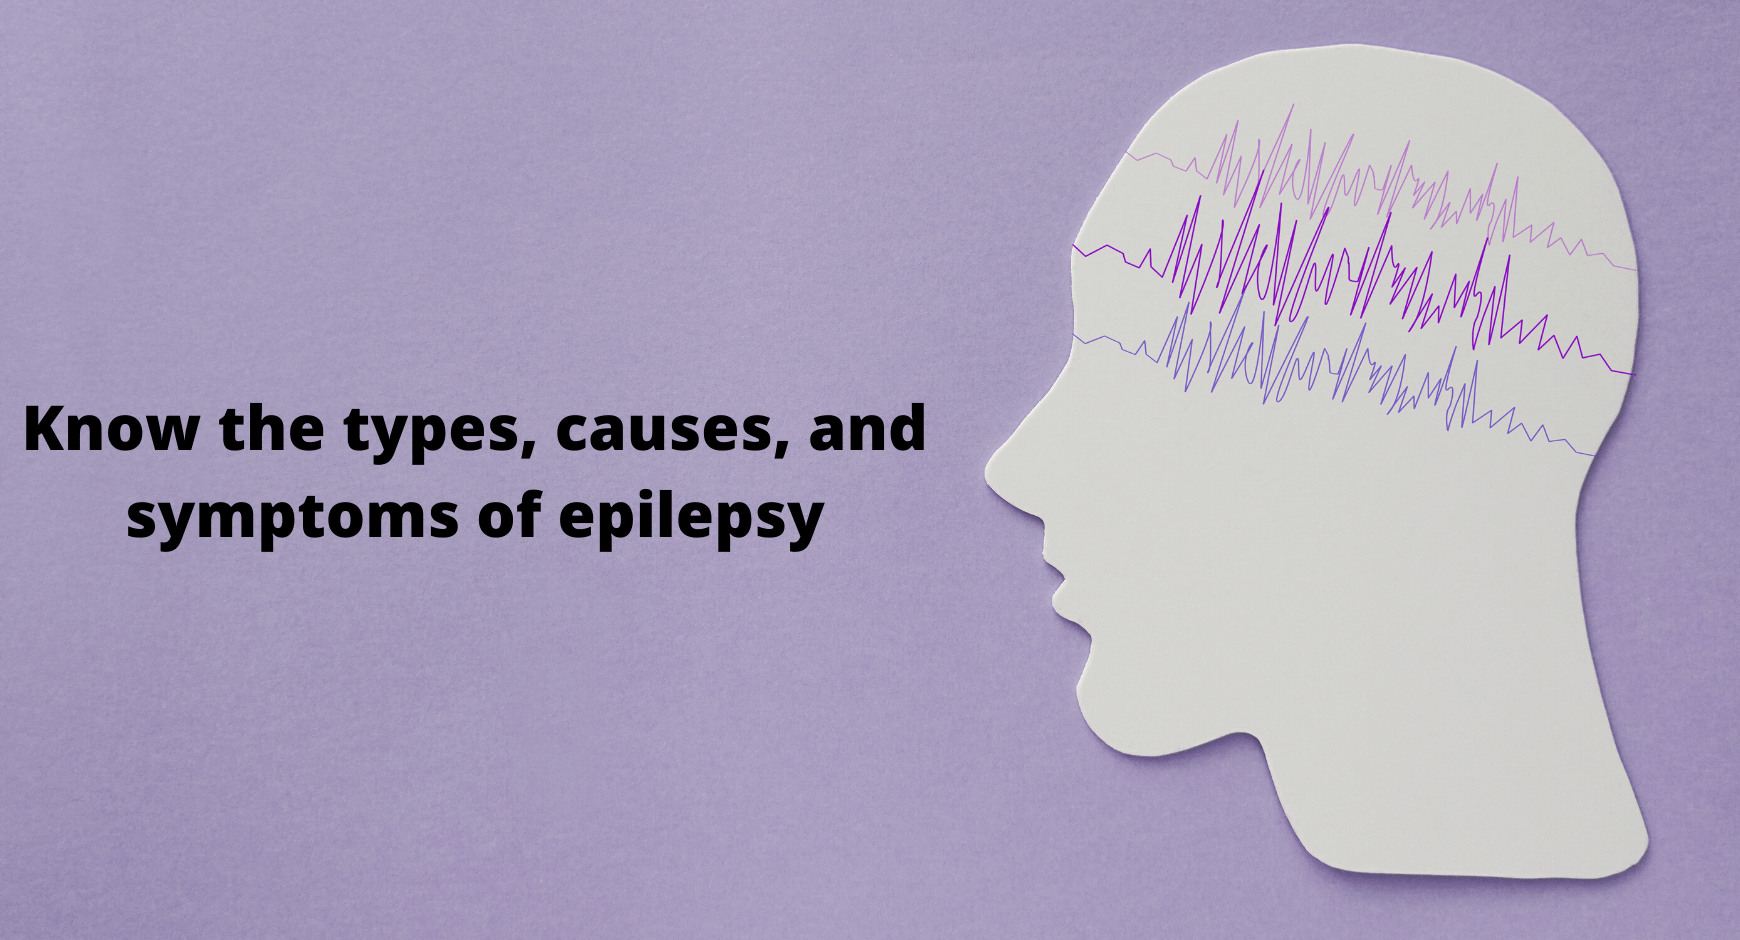 Know the types, causes, and symptoms of epilepsy